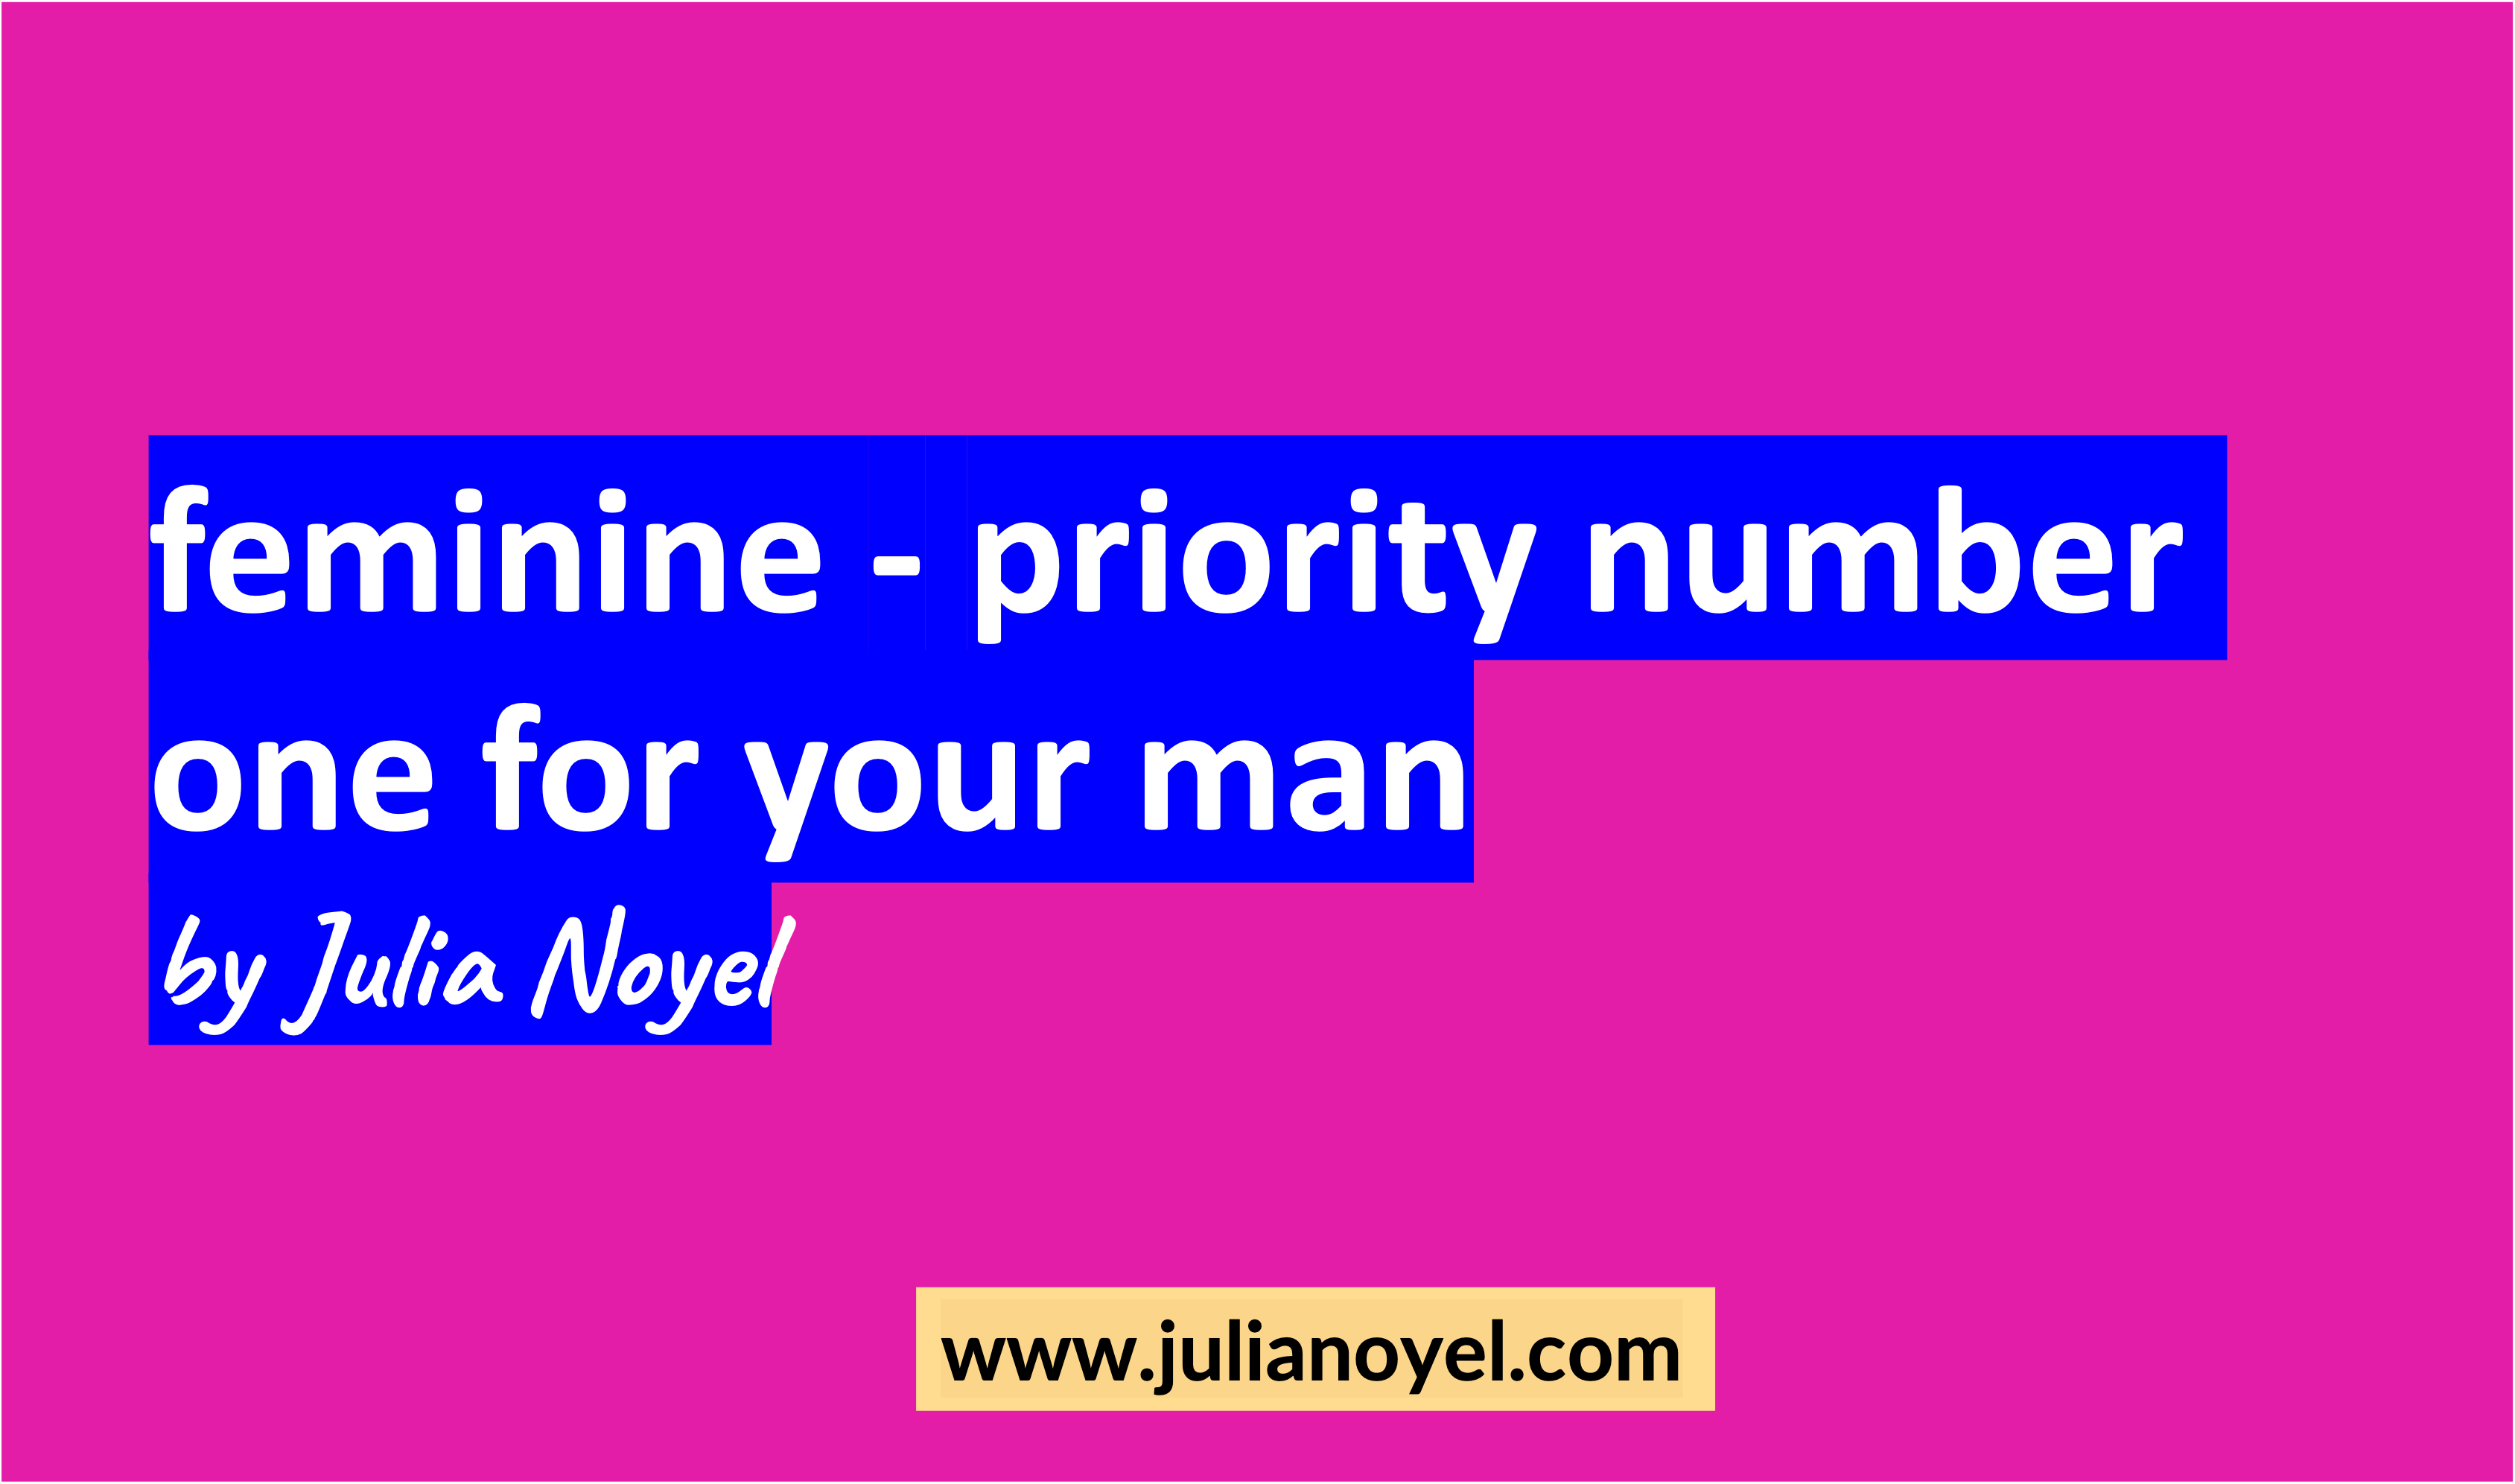 feminine - priority number one for your man